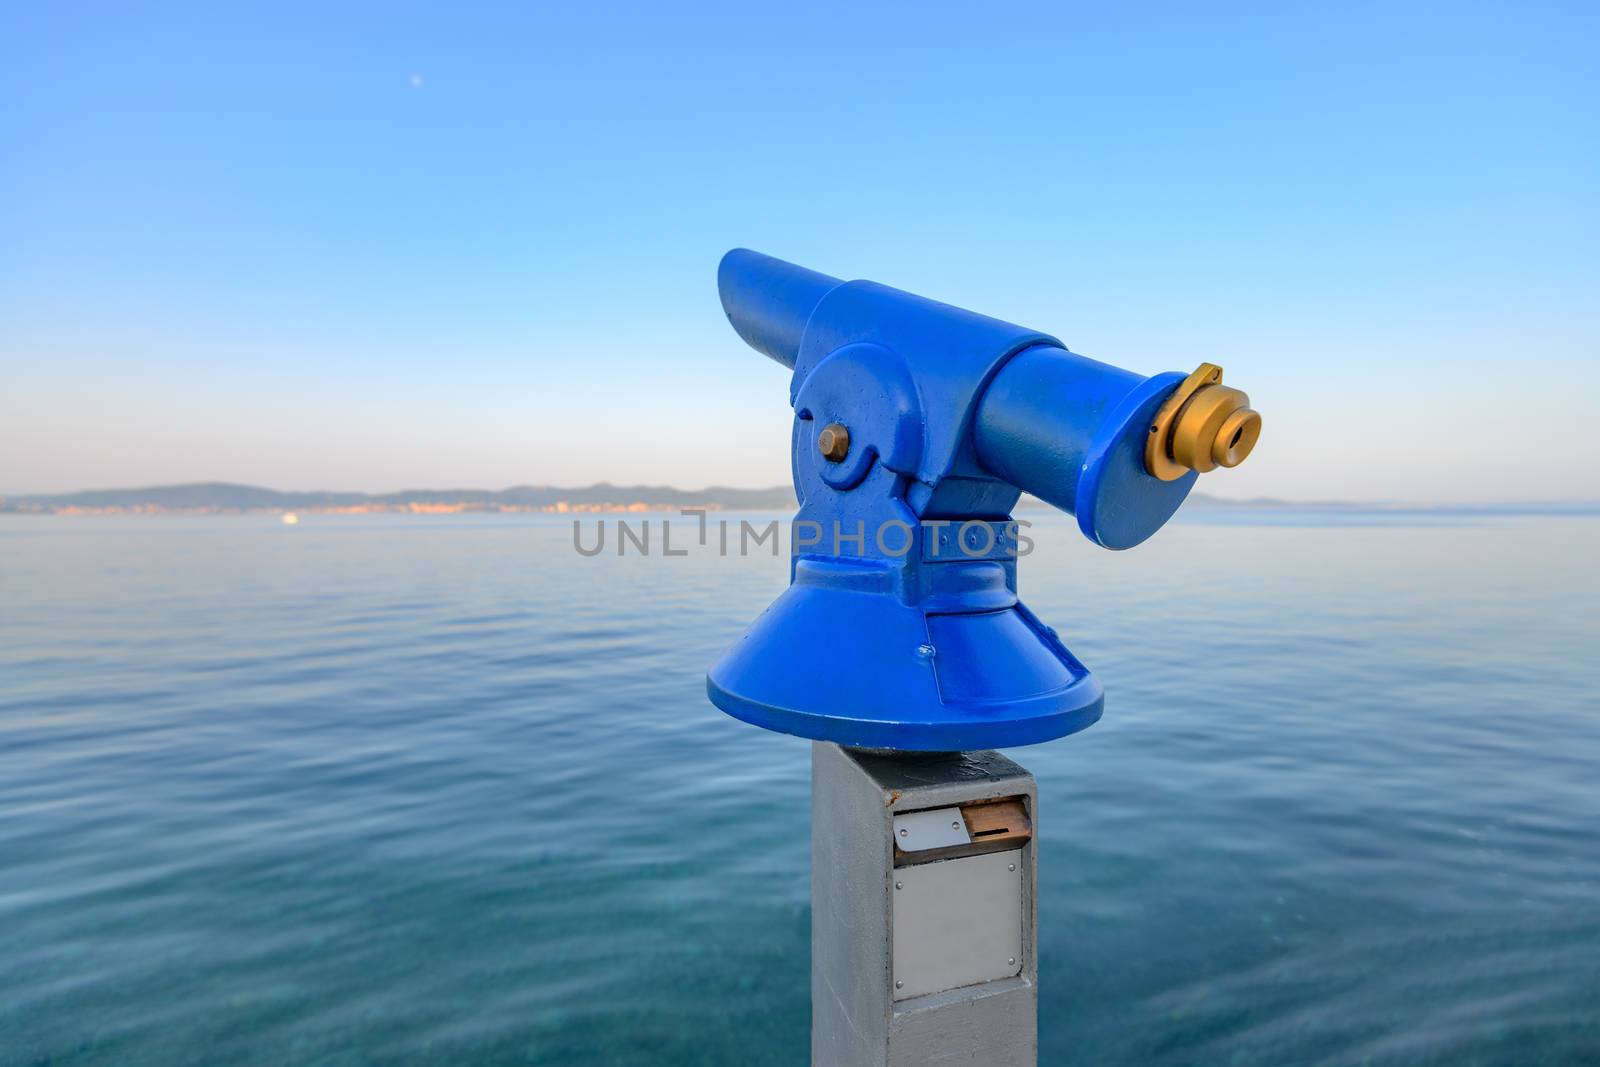 Blue public coin operated telescope, sea and island in background, located on waterfron early in the morning